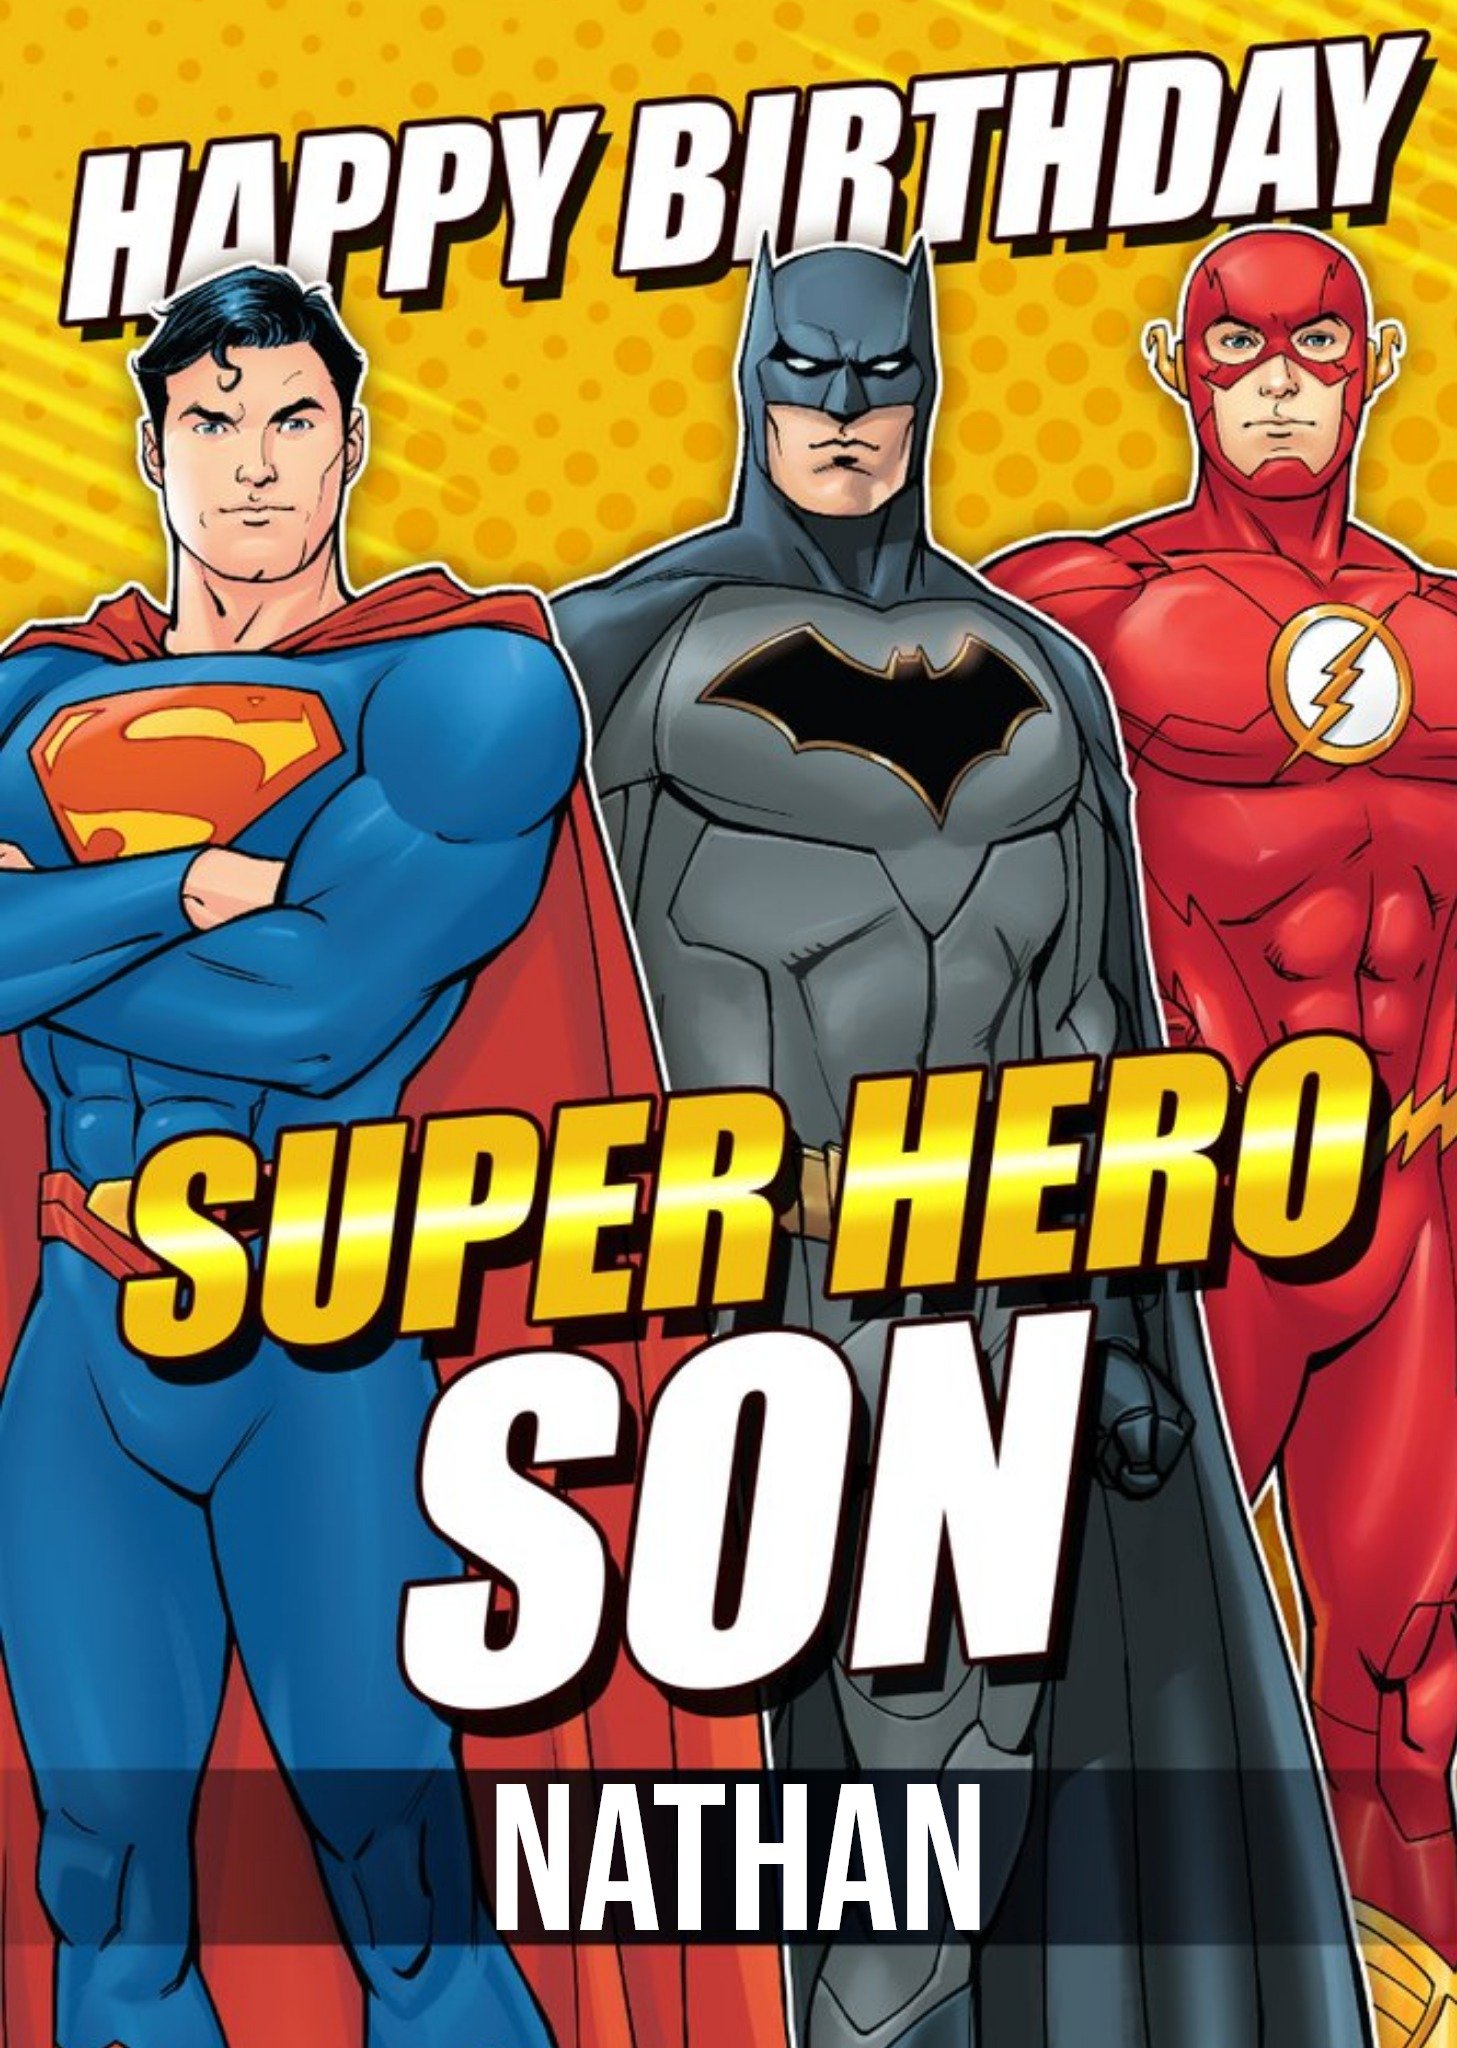 Other Justice League Super Hero Son Birthday Card, Large